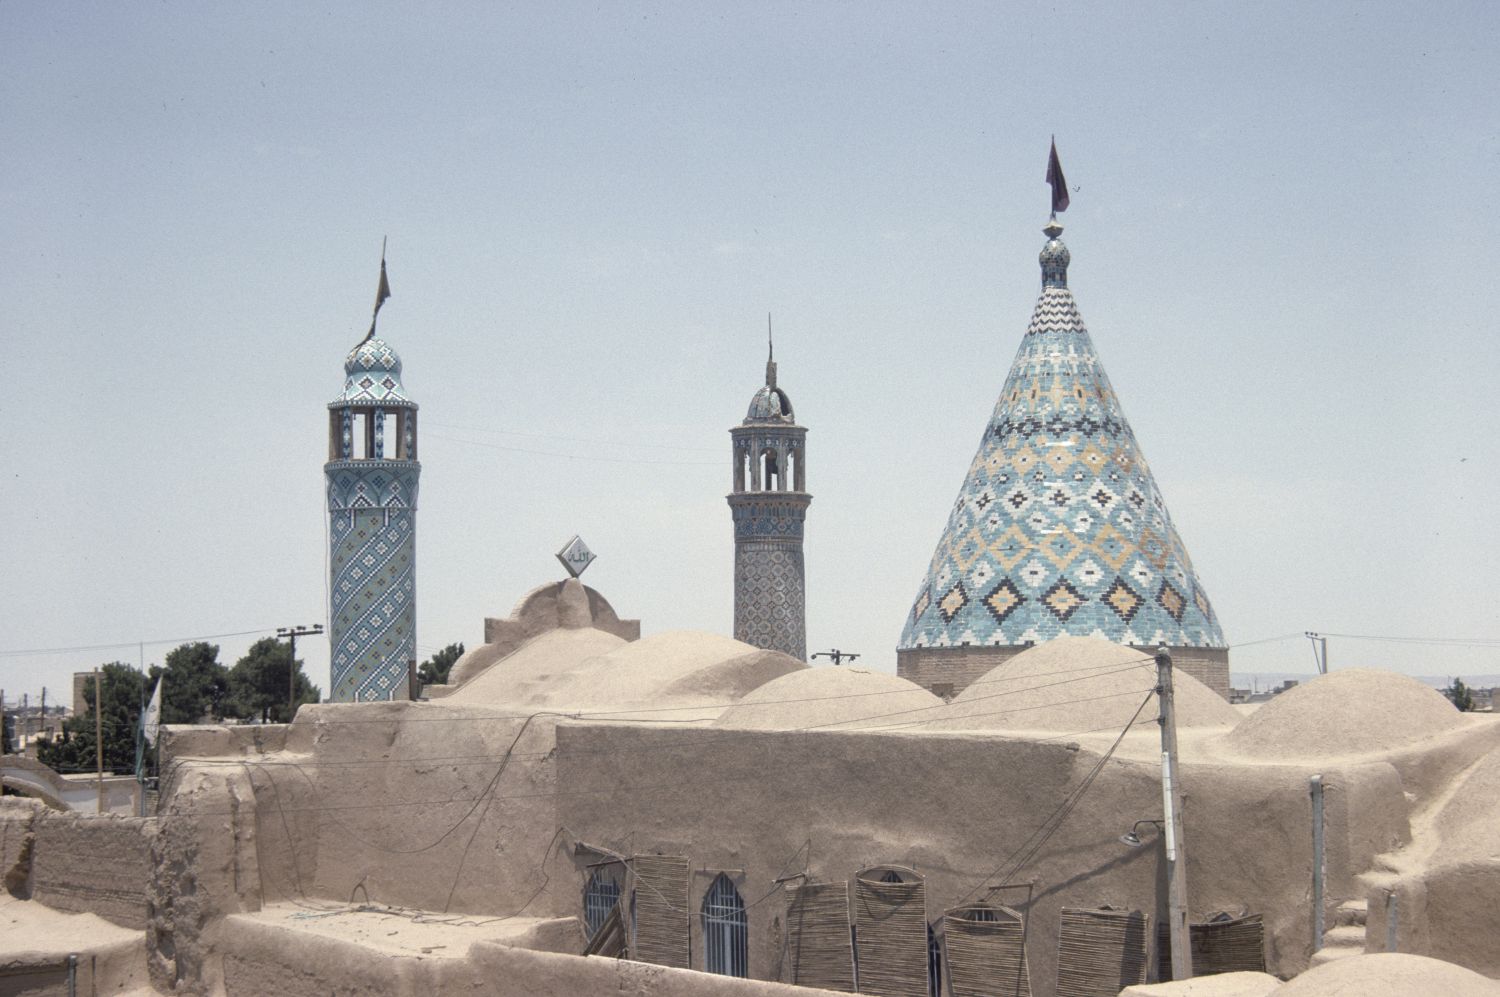 View of conical dome and minarets from a neighboring building.